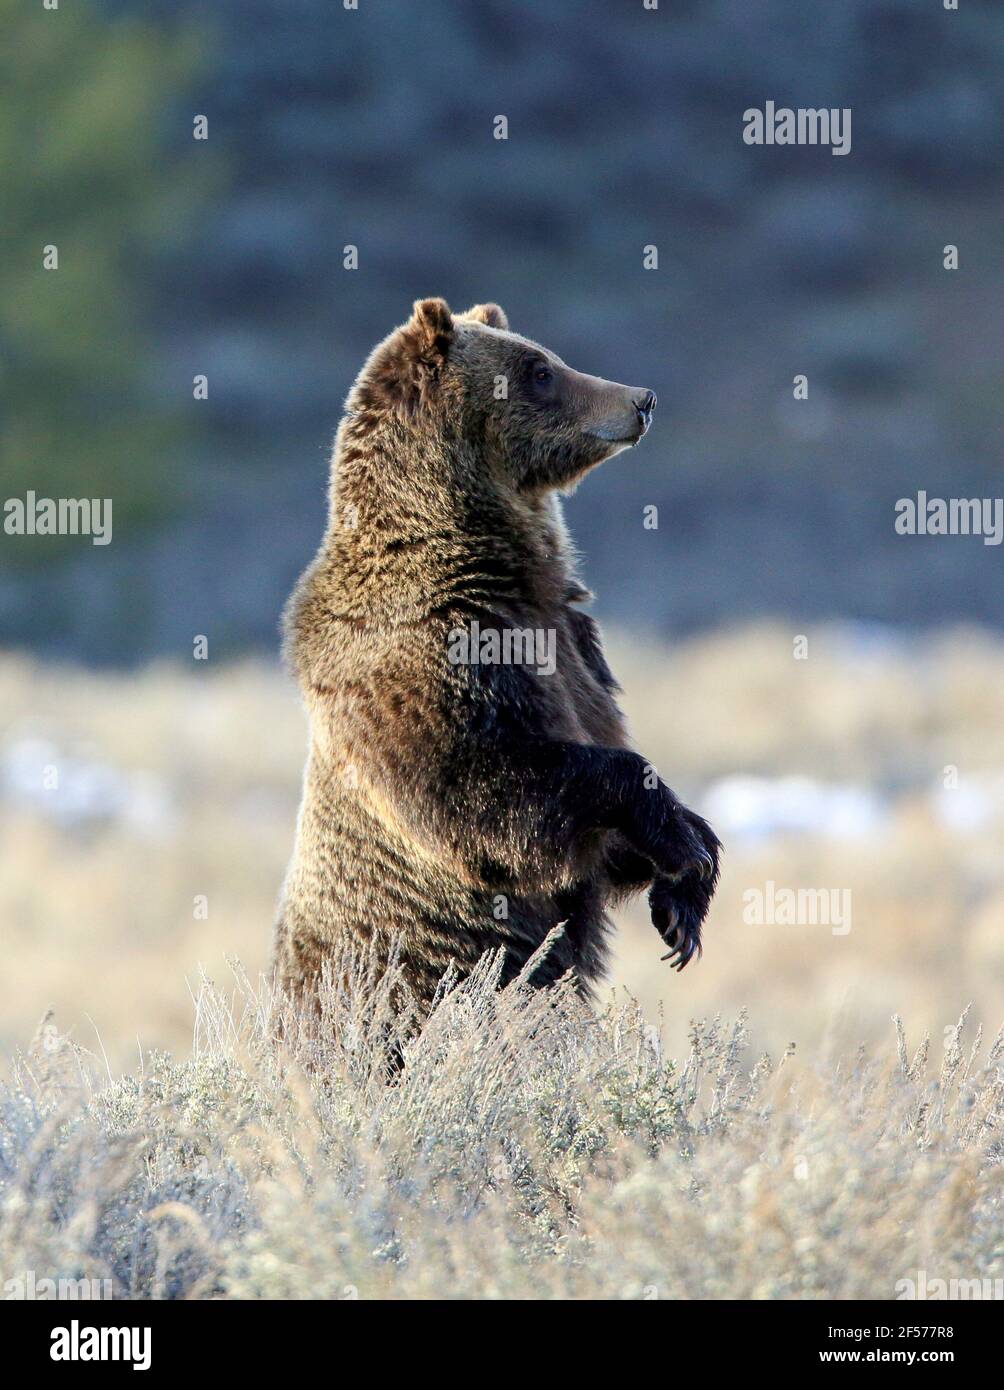 Grizzly bear in standing habitat Stock Photo